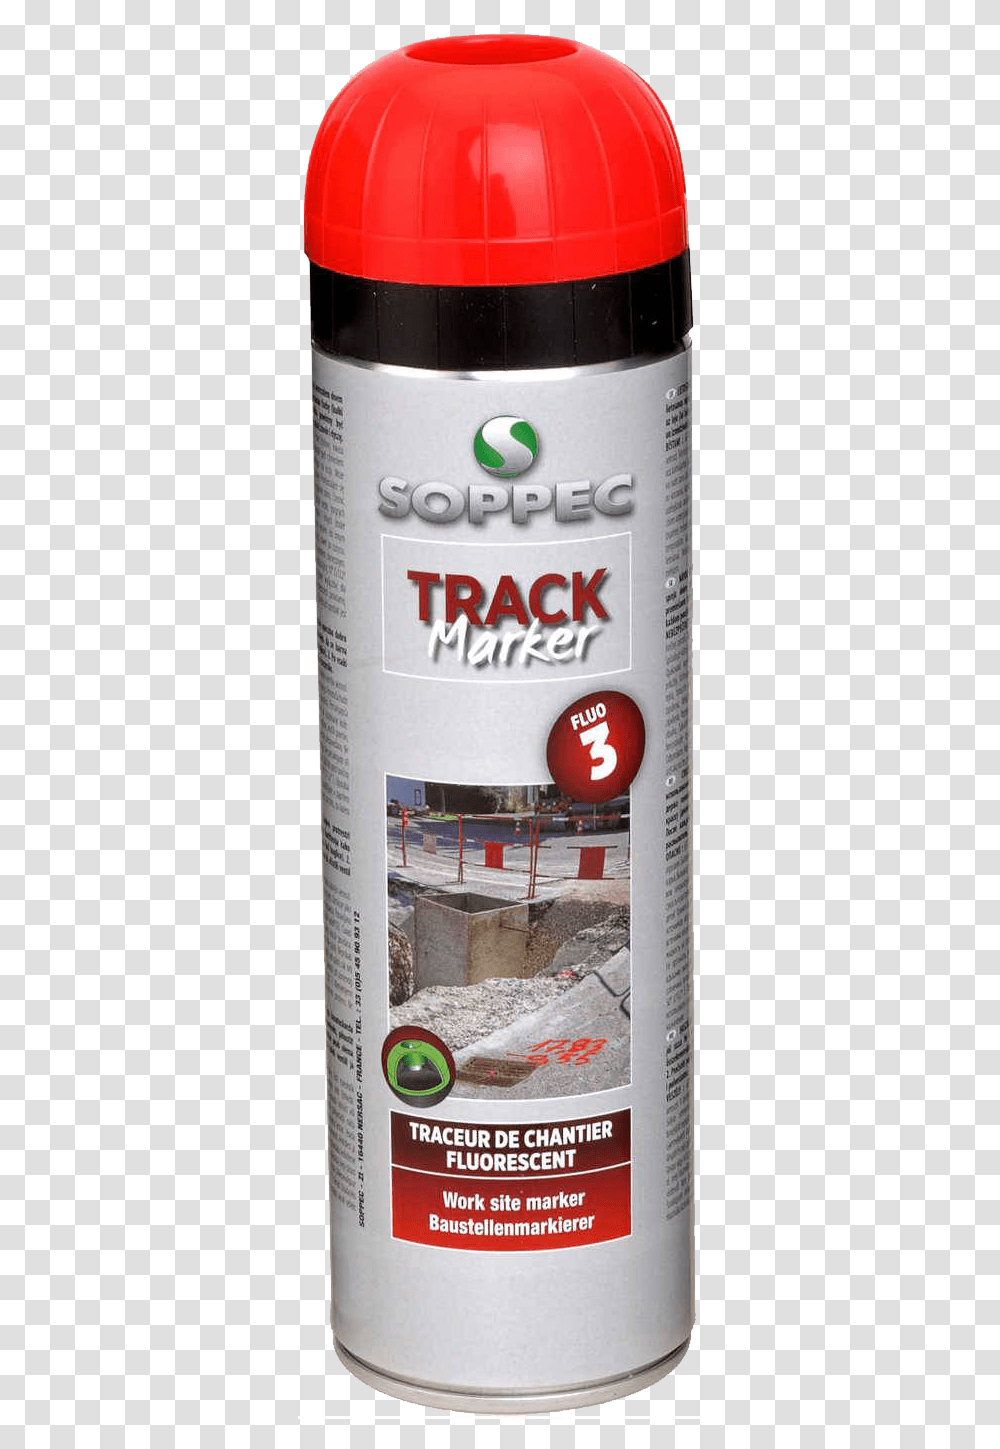 Red Spray Paint 500 Ml Soppec Track Marker Bottle, Label, Advertisement, Can Transparent Png